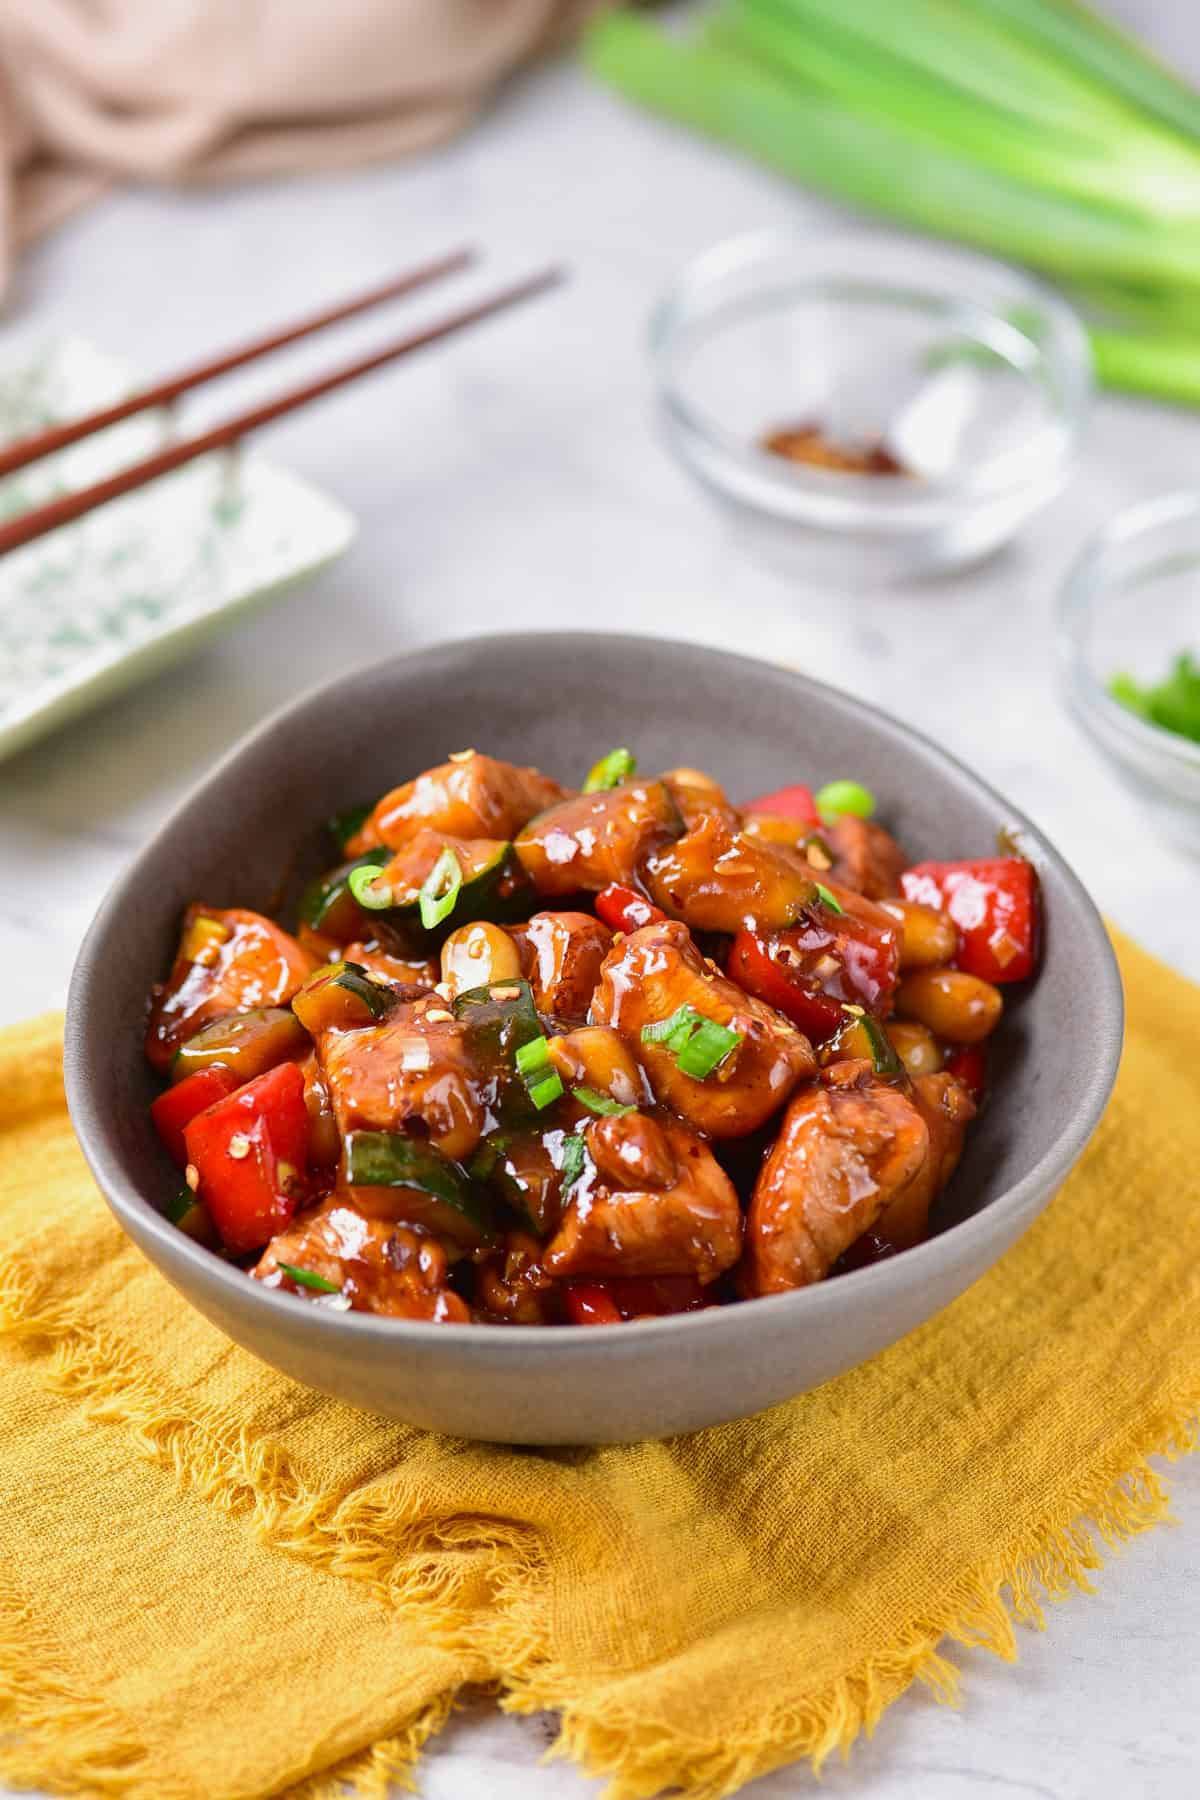 The completed kung pao chicken in a bowl.